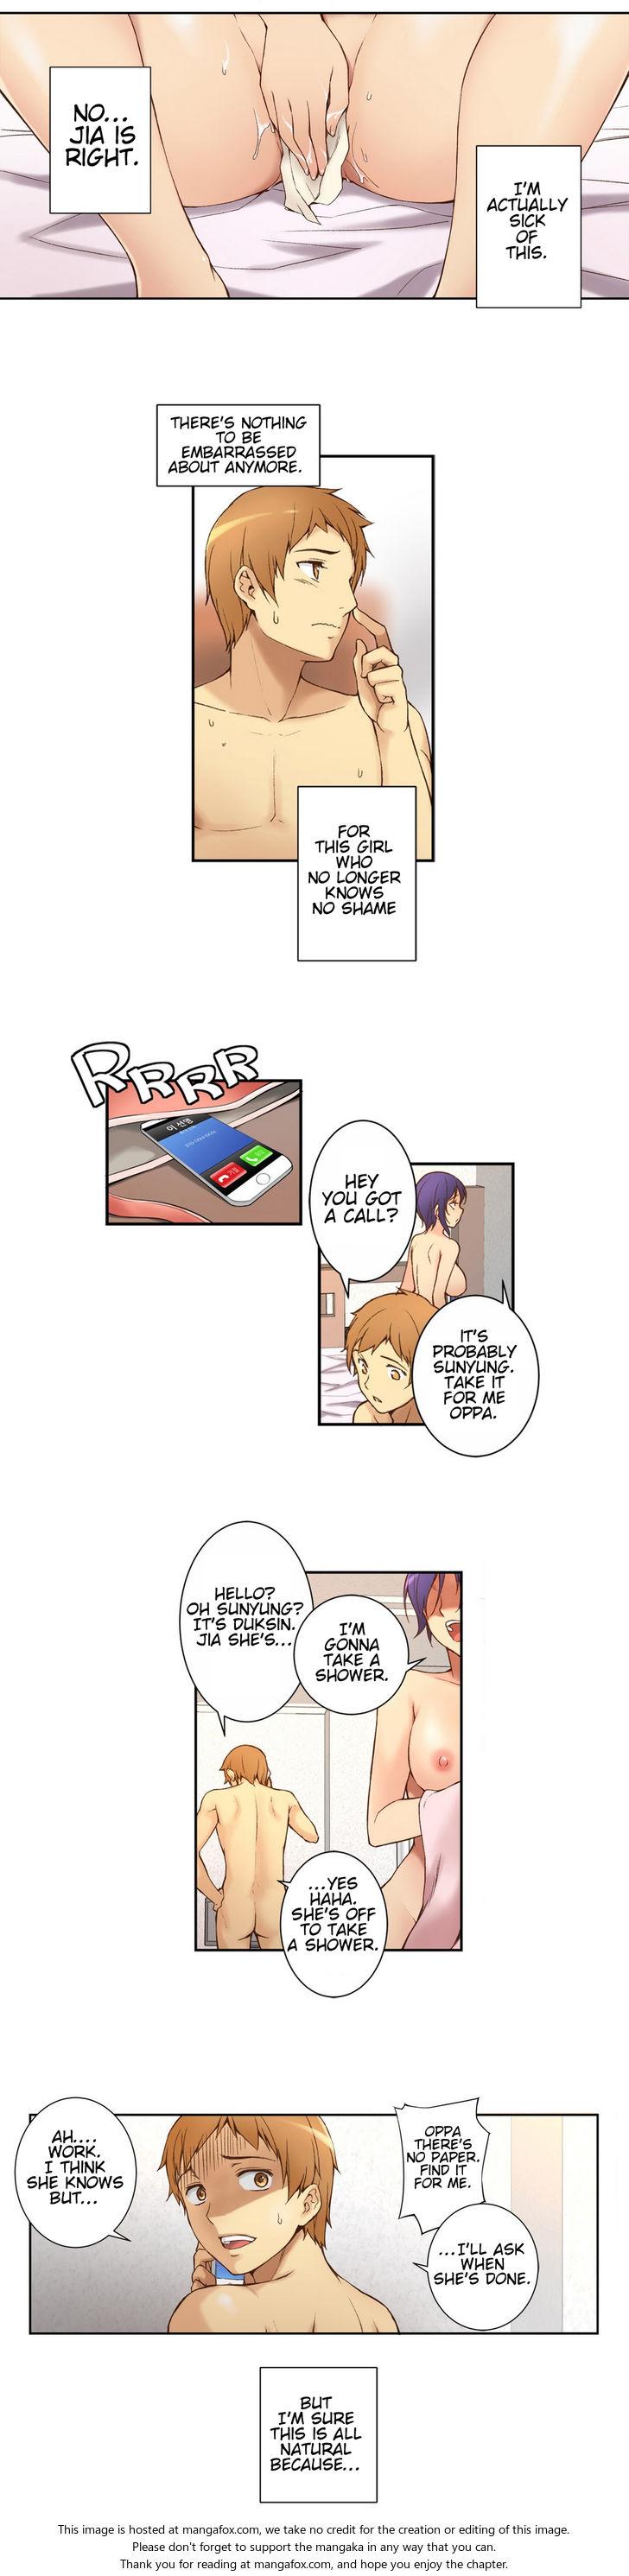 Newbie [Donggul Gom] She is Young (English) Part 1/2 Assgape - Page 8